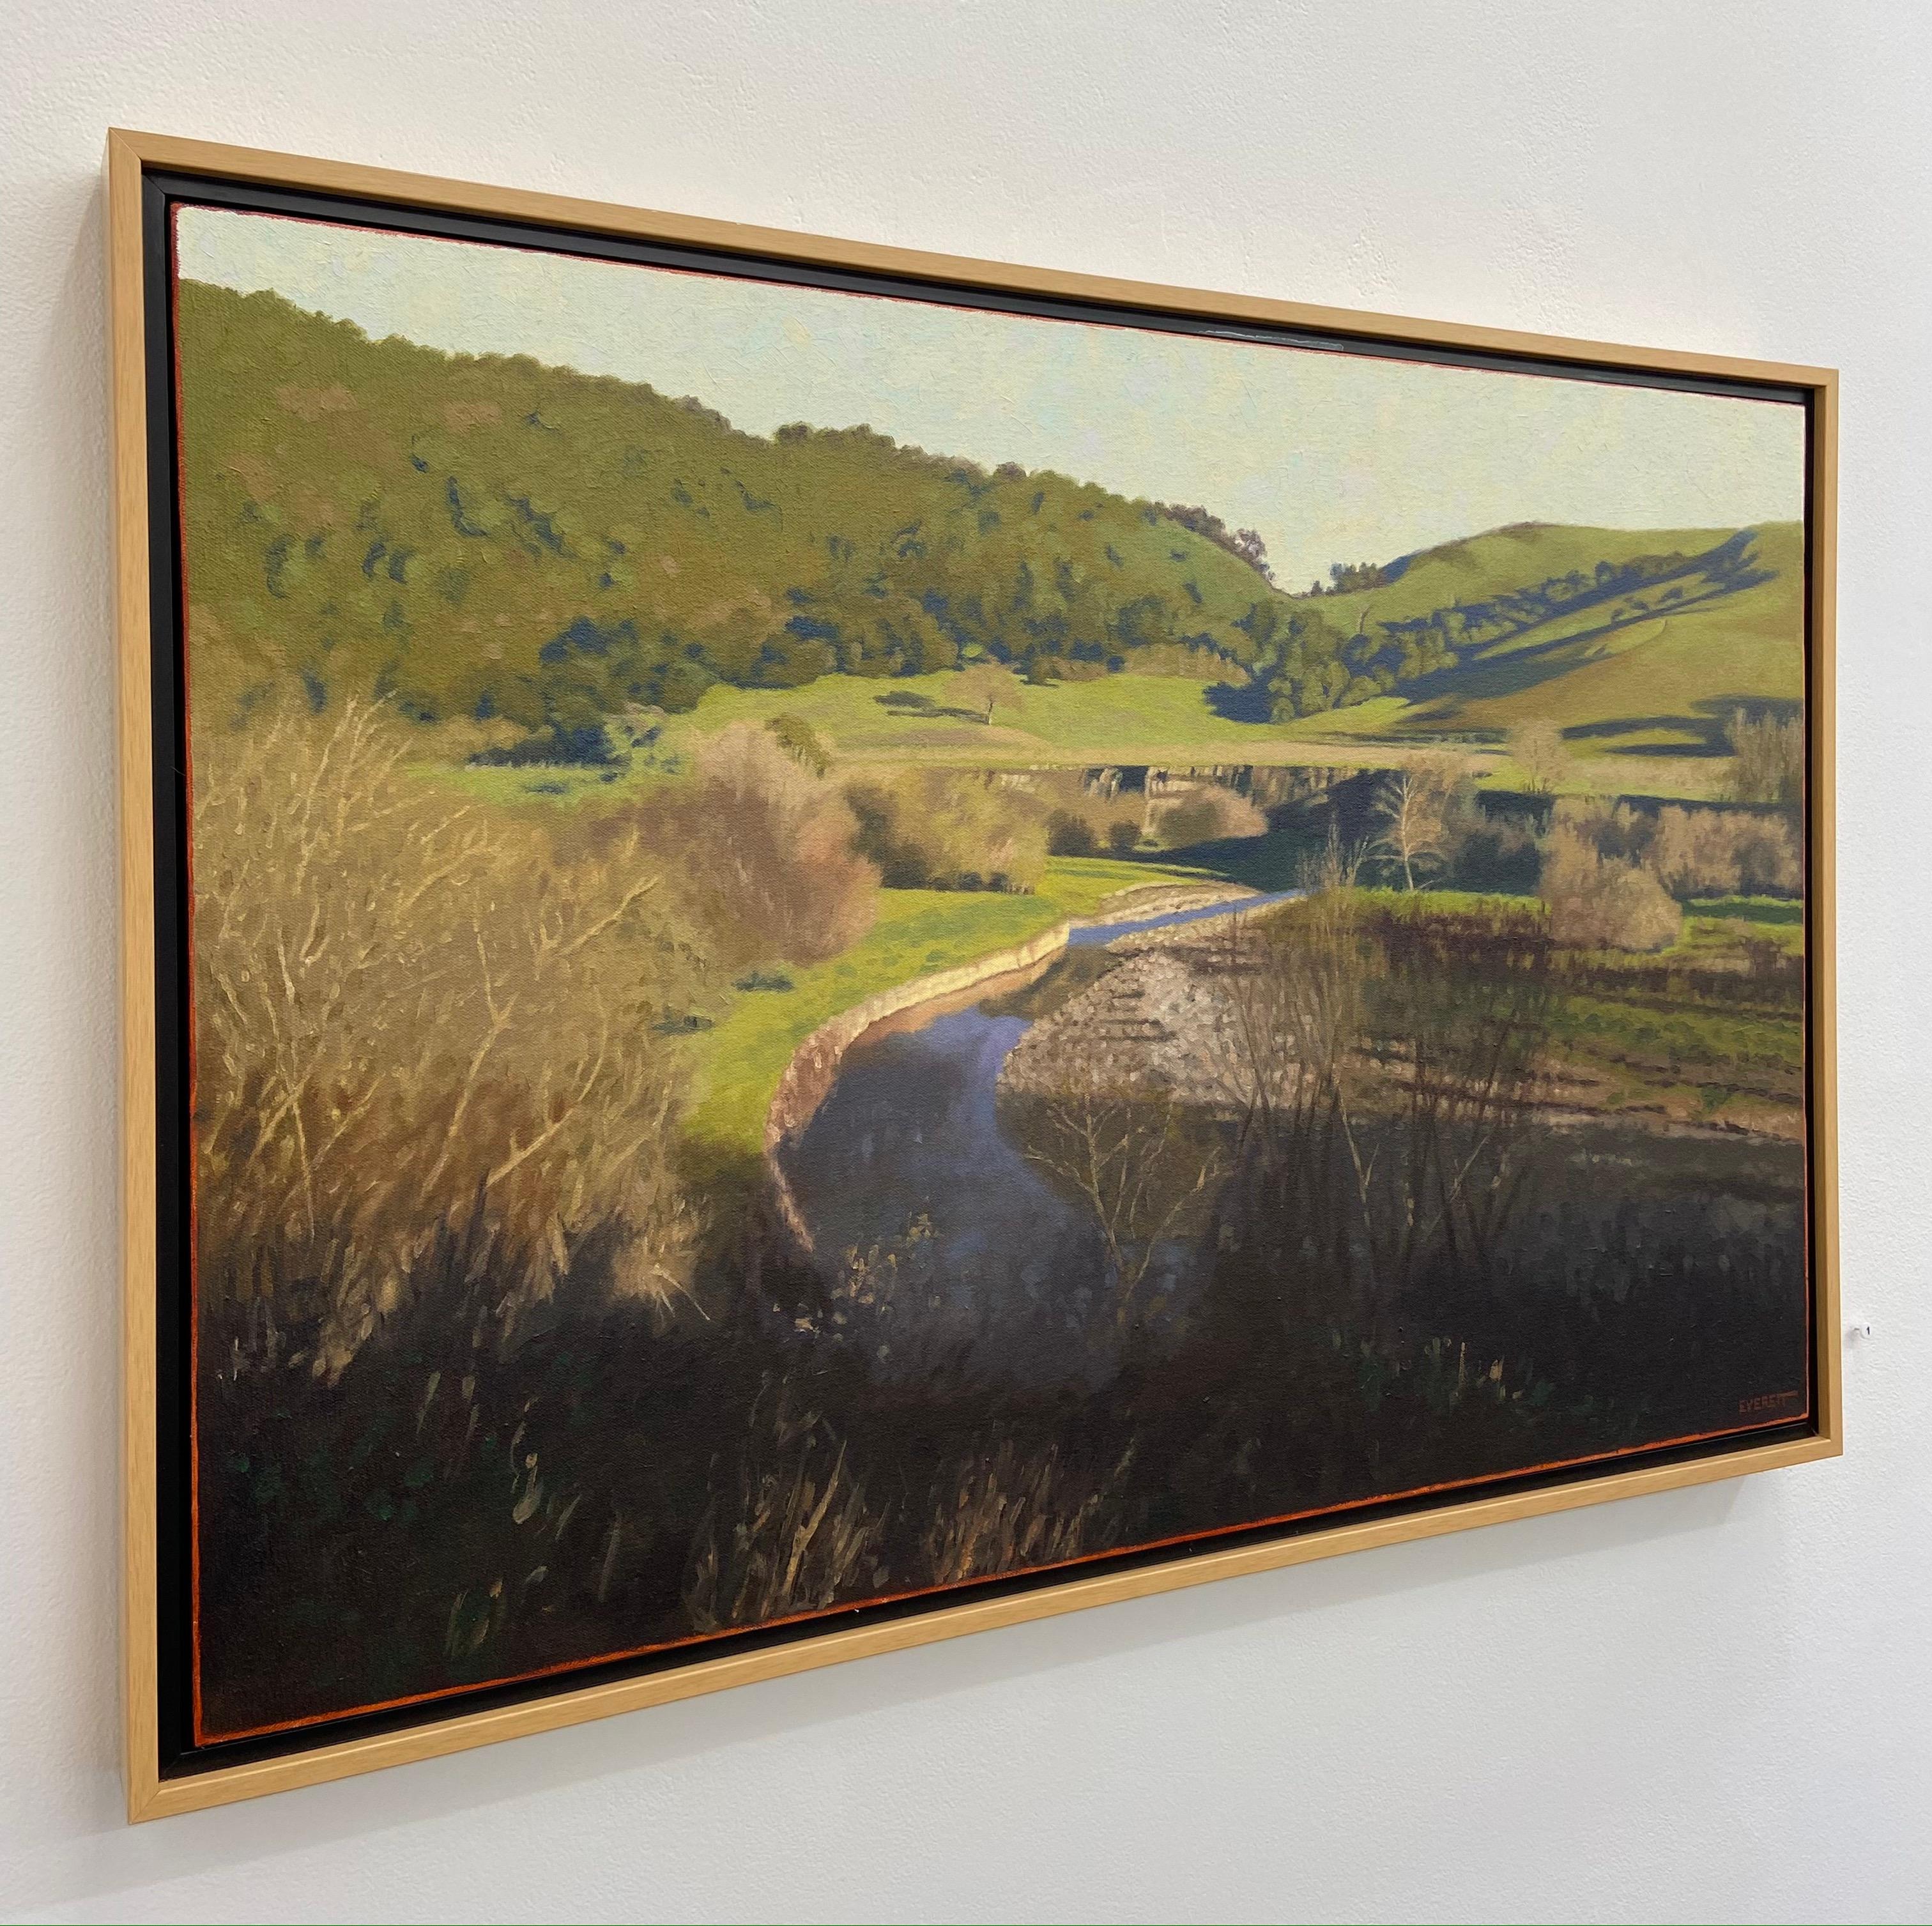 Bruce Everett's medium to large scale landscape paintings of Southern California and the Central Coast are characterized by dramatic light with raking shadows, unusual vantage points, and inspired compositions.  Everett’s reasons for painting the